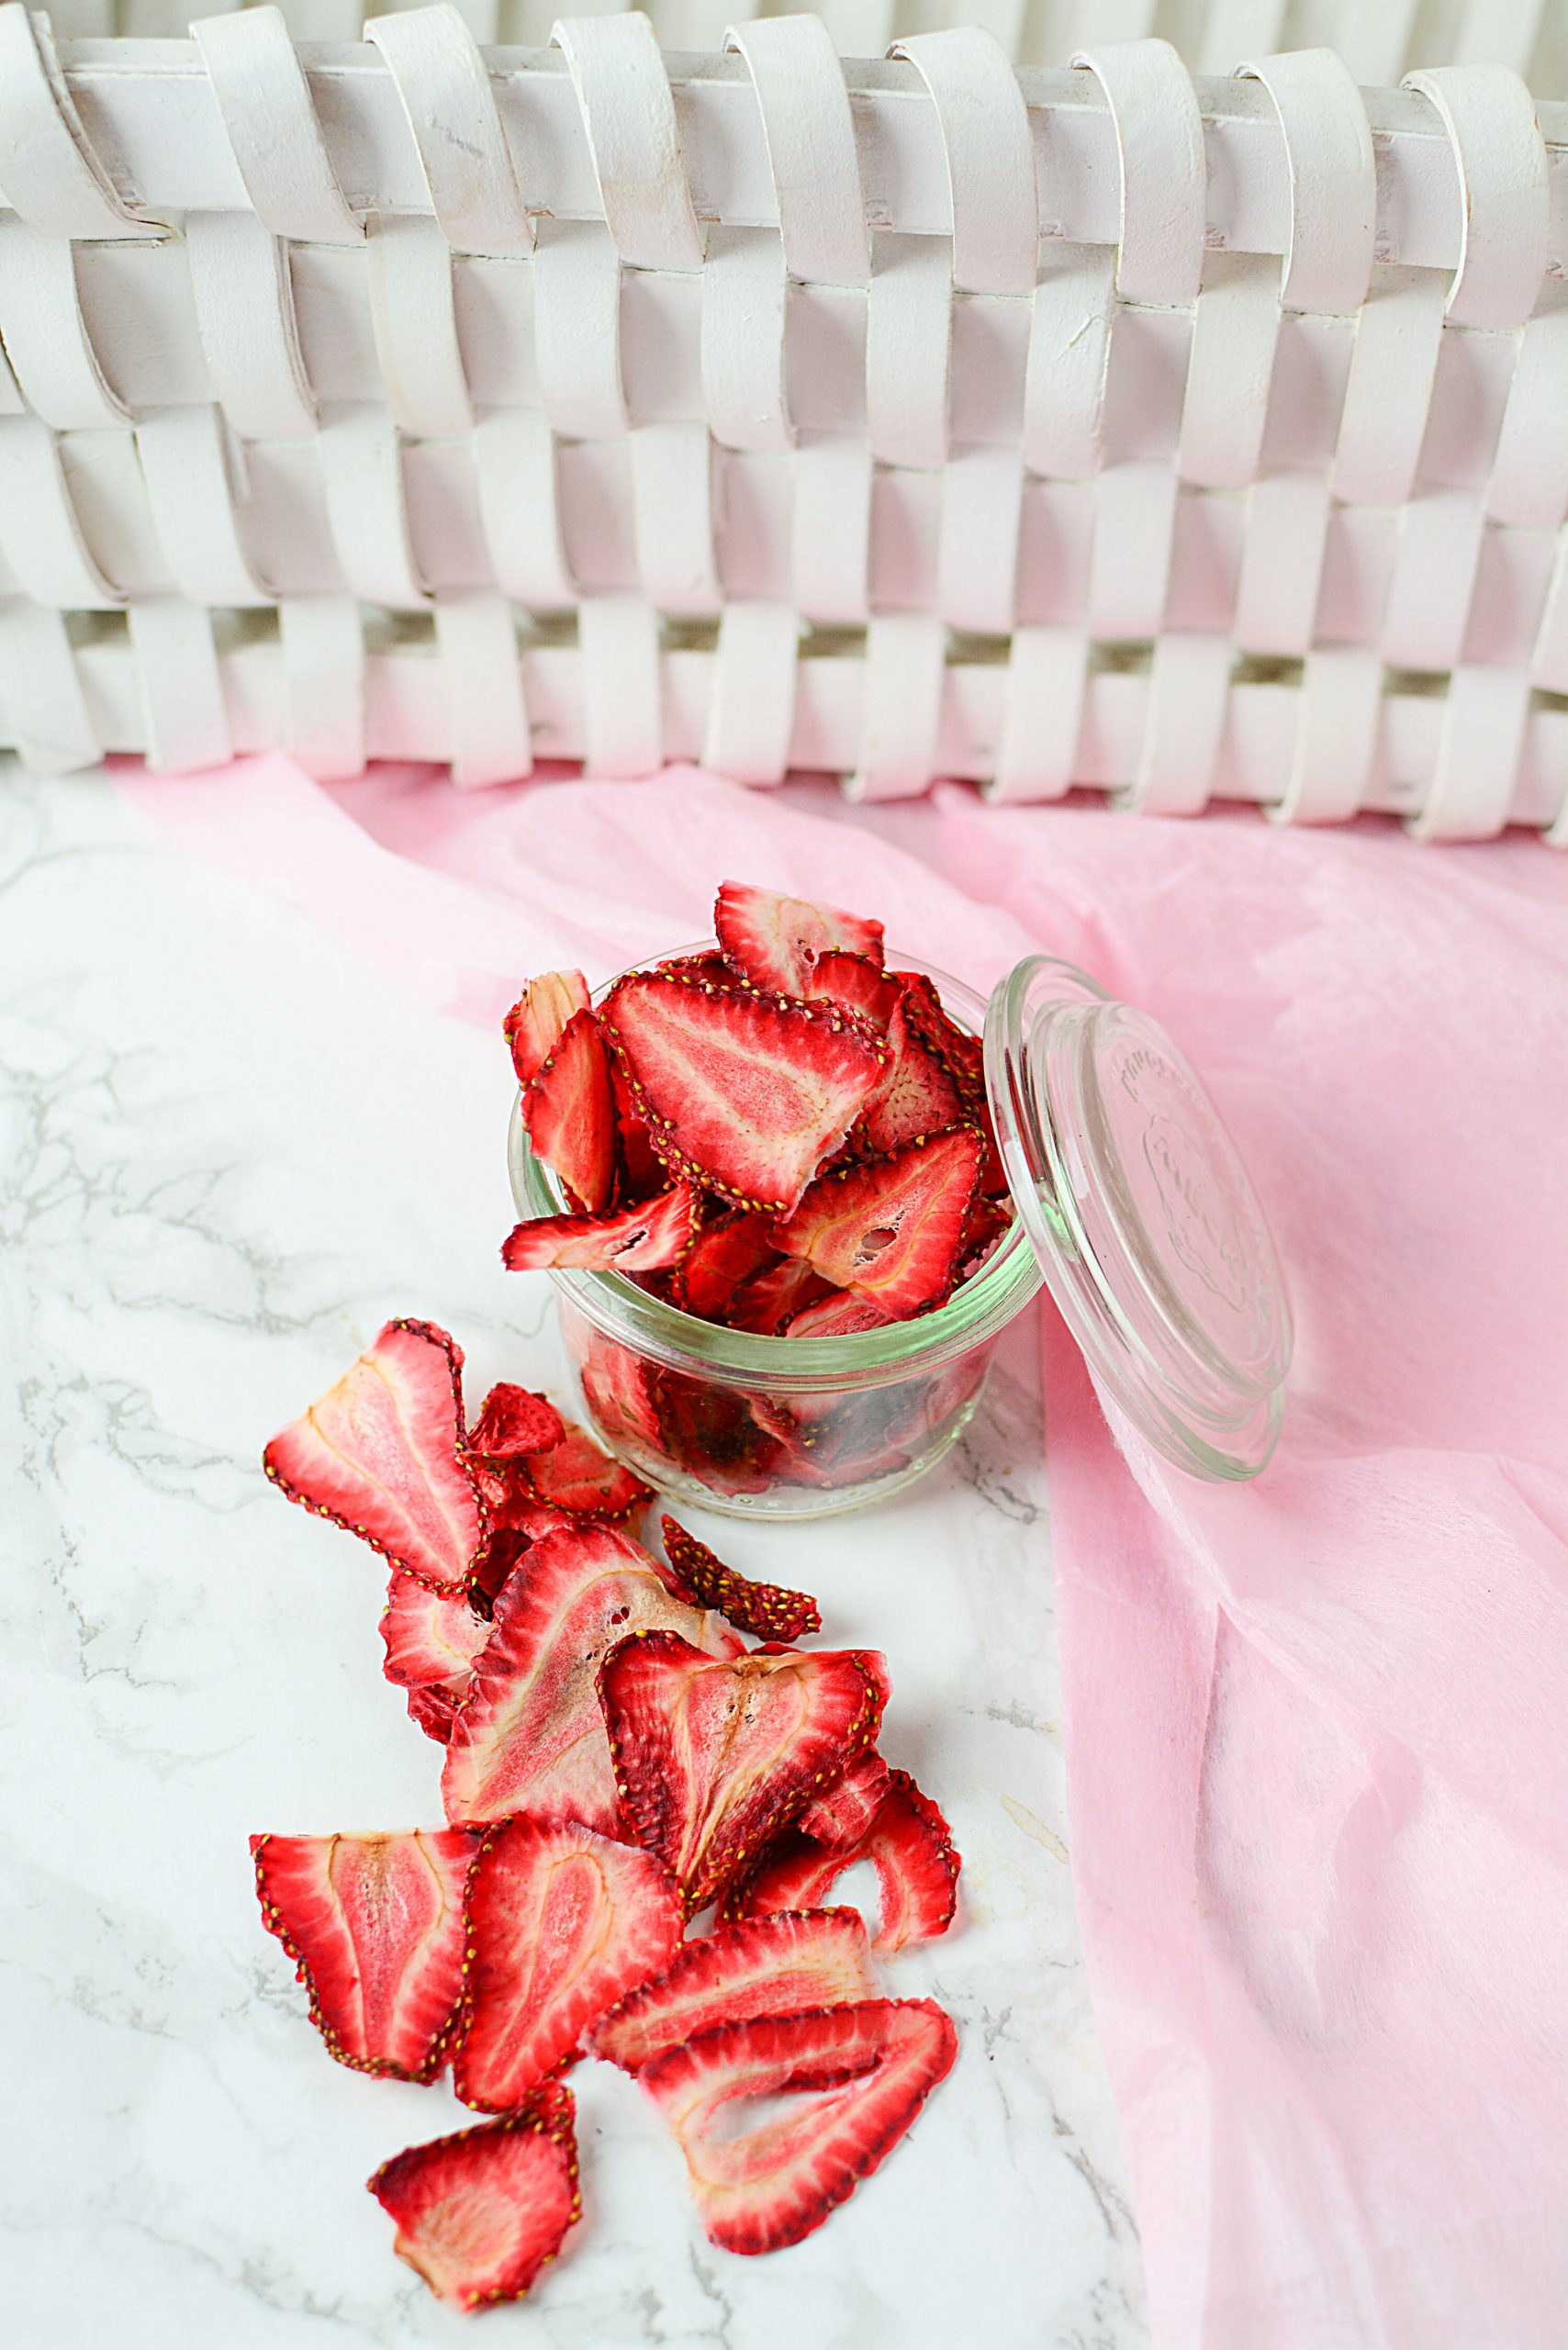 A pretty glass jar filled with overflowing dried strawberries resting close to a pink napkin. In front of the glass jar is the overflow of sliced, dried strawberries.